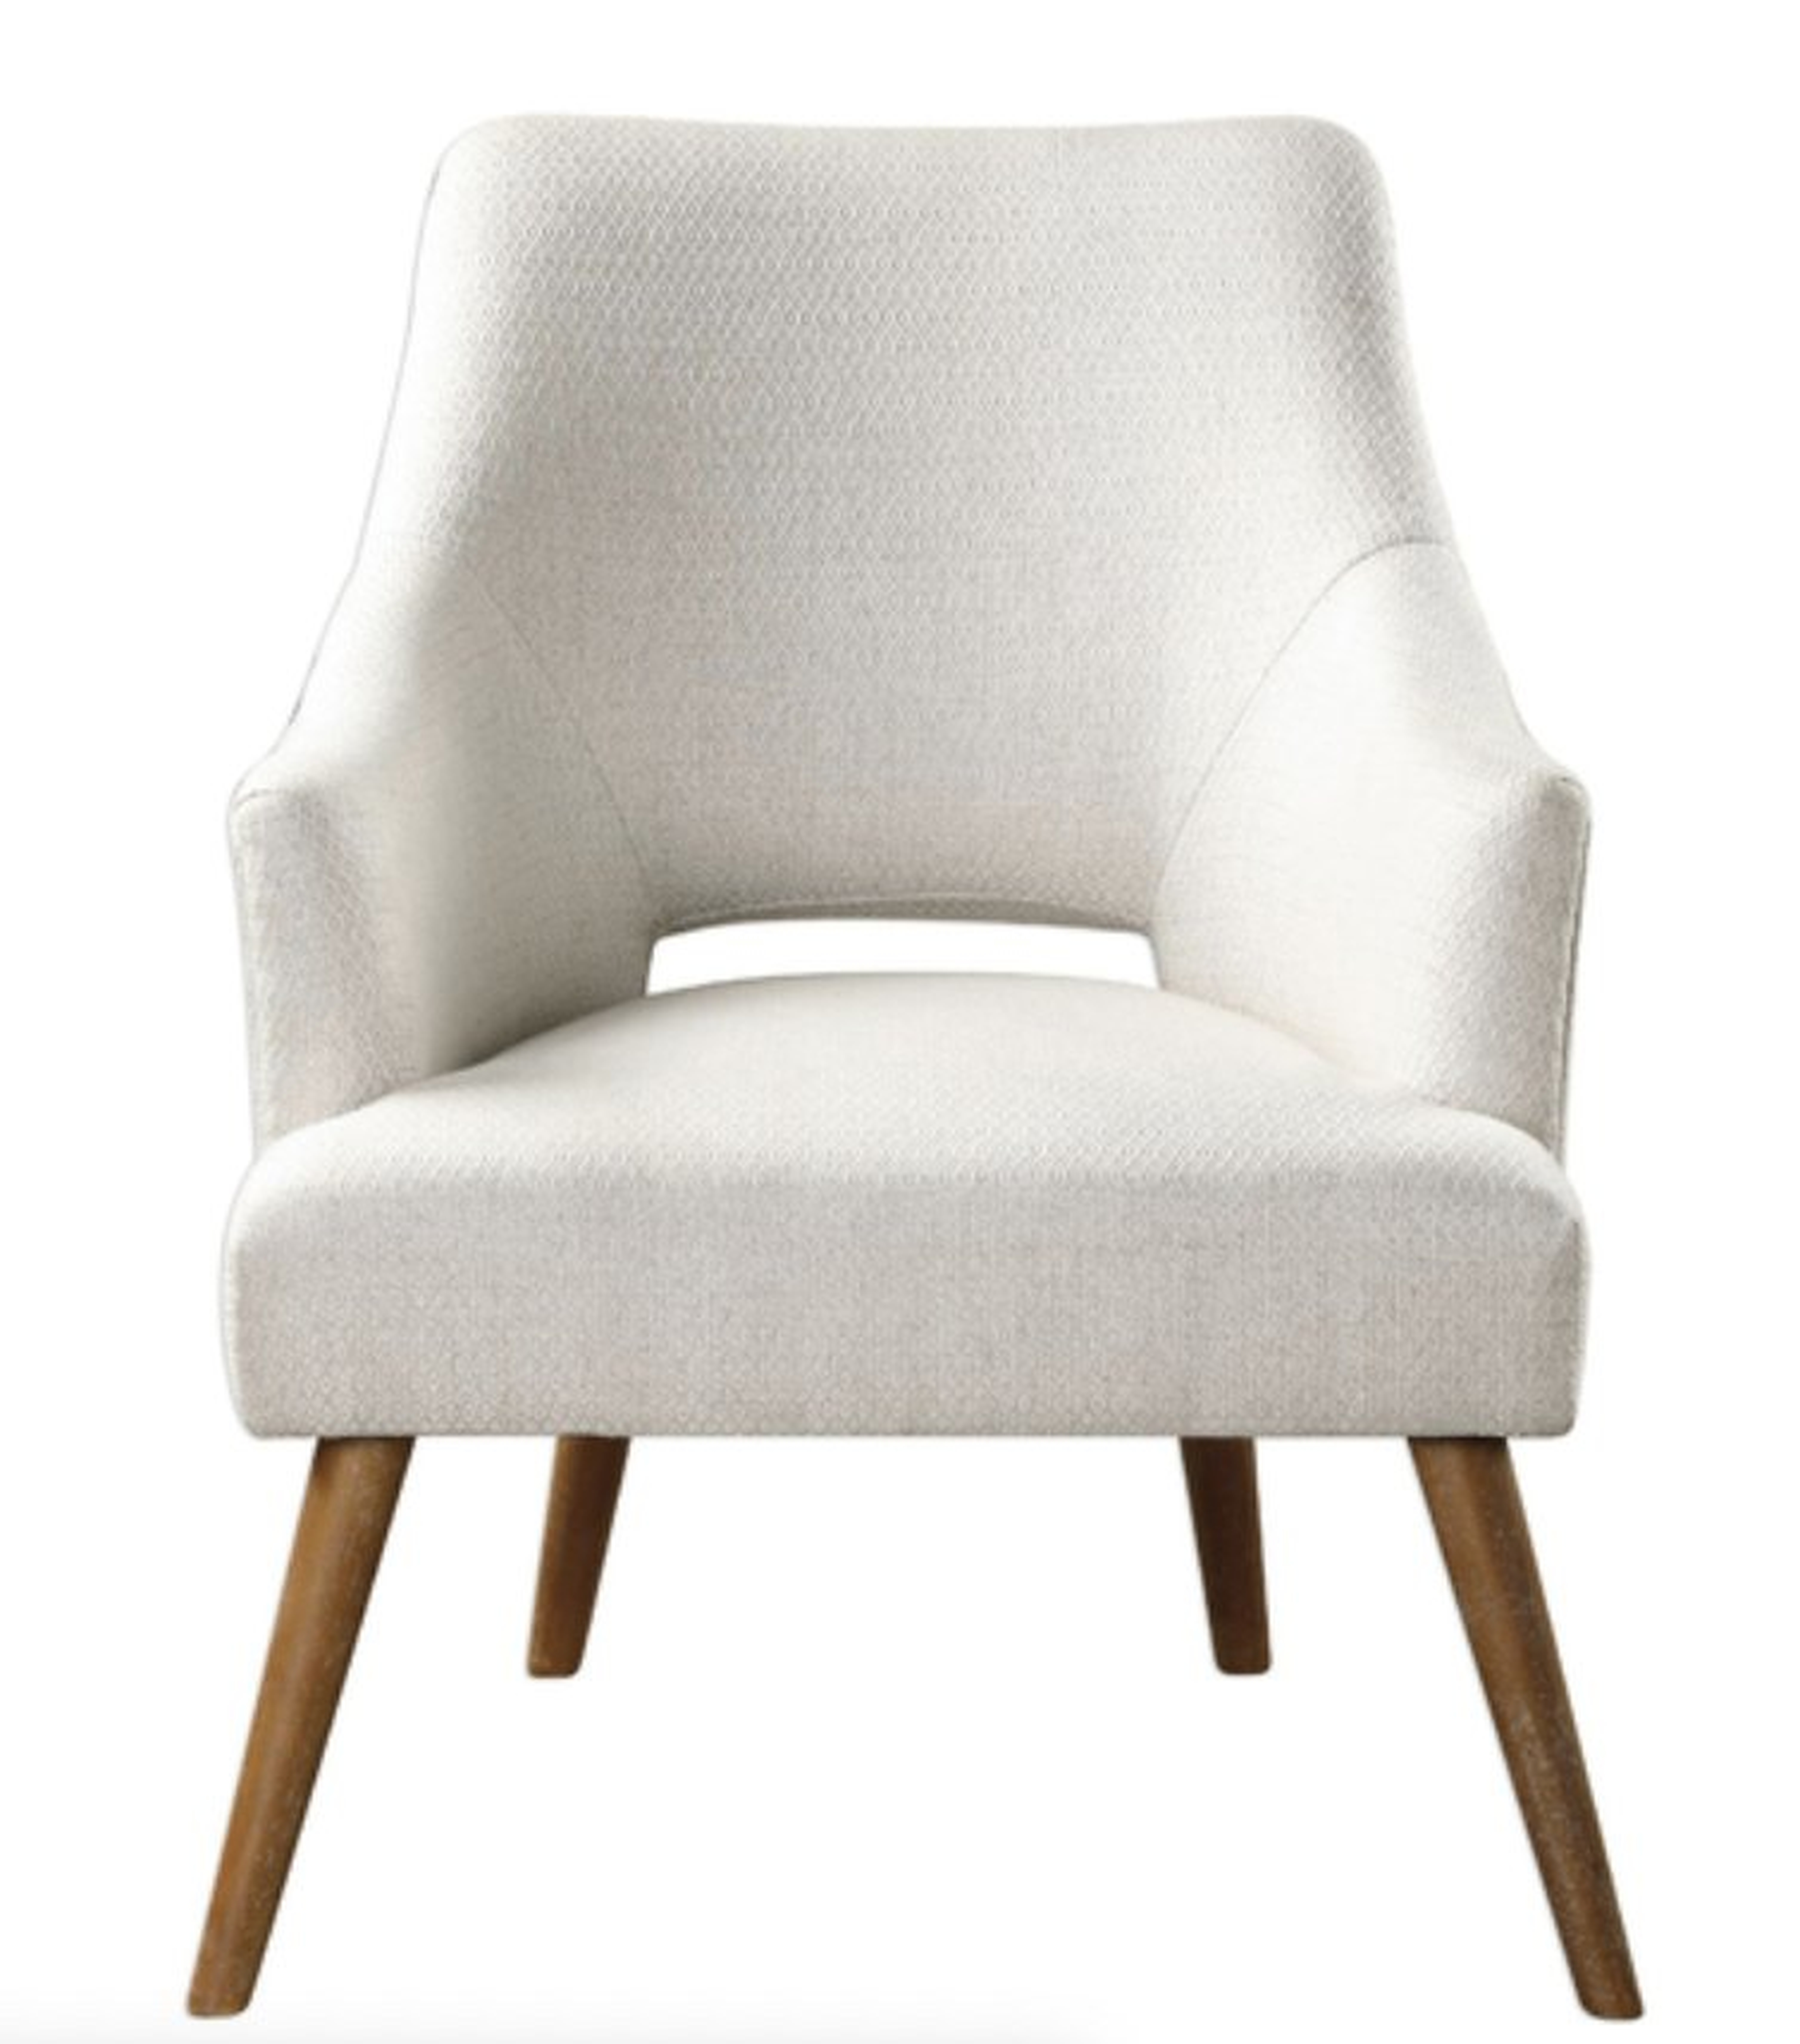 Althea Accent Chair, White - Lulu and Georgia